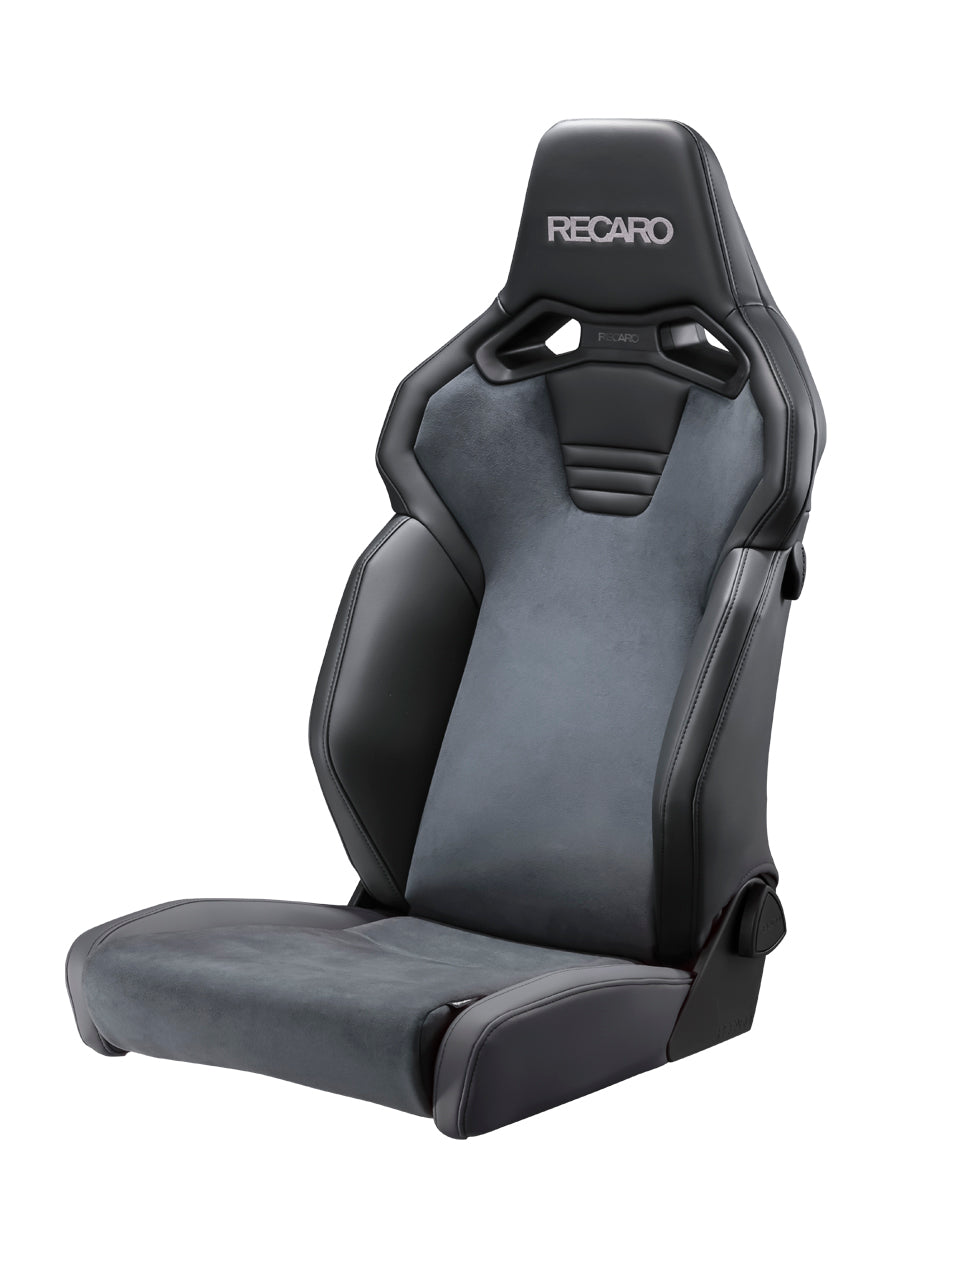 RECARO SR-C UT100H A R CG BK ARTIFICIAL LEATHER BLACK COLOR AND ULTRA SUEDE CHARCOAL GRAY COLOR ARMREST ATTACHEBLE WITH HEATED SEATS FOR  81-121.29.645-0